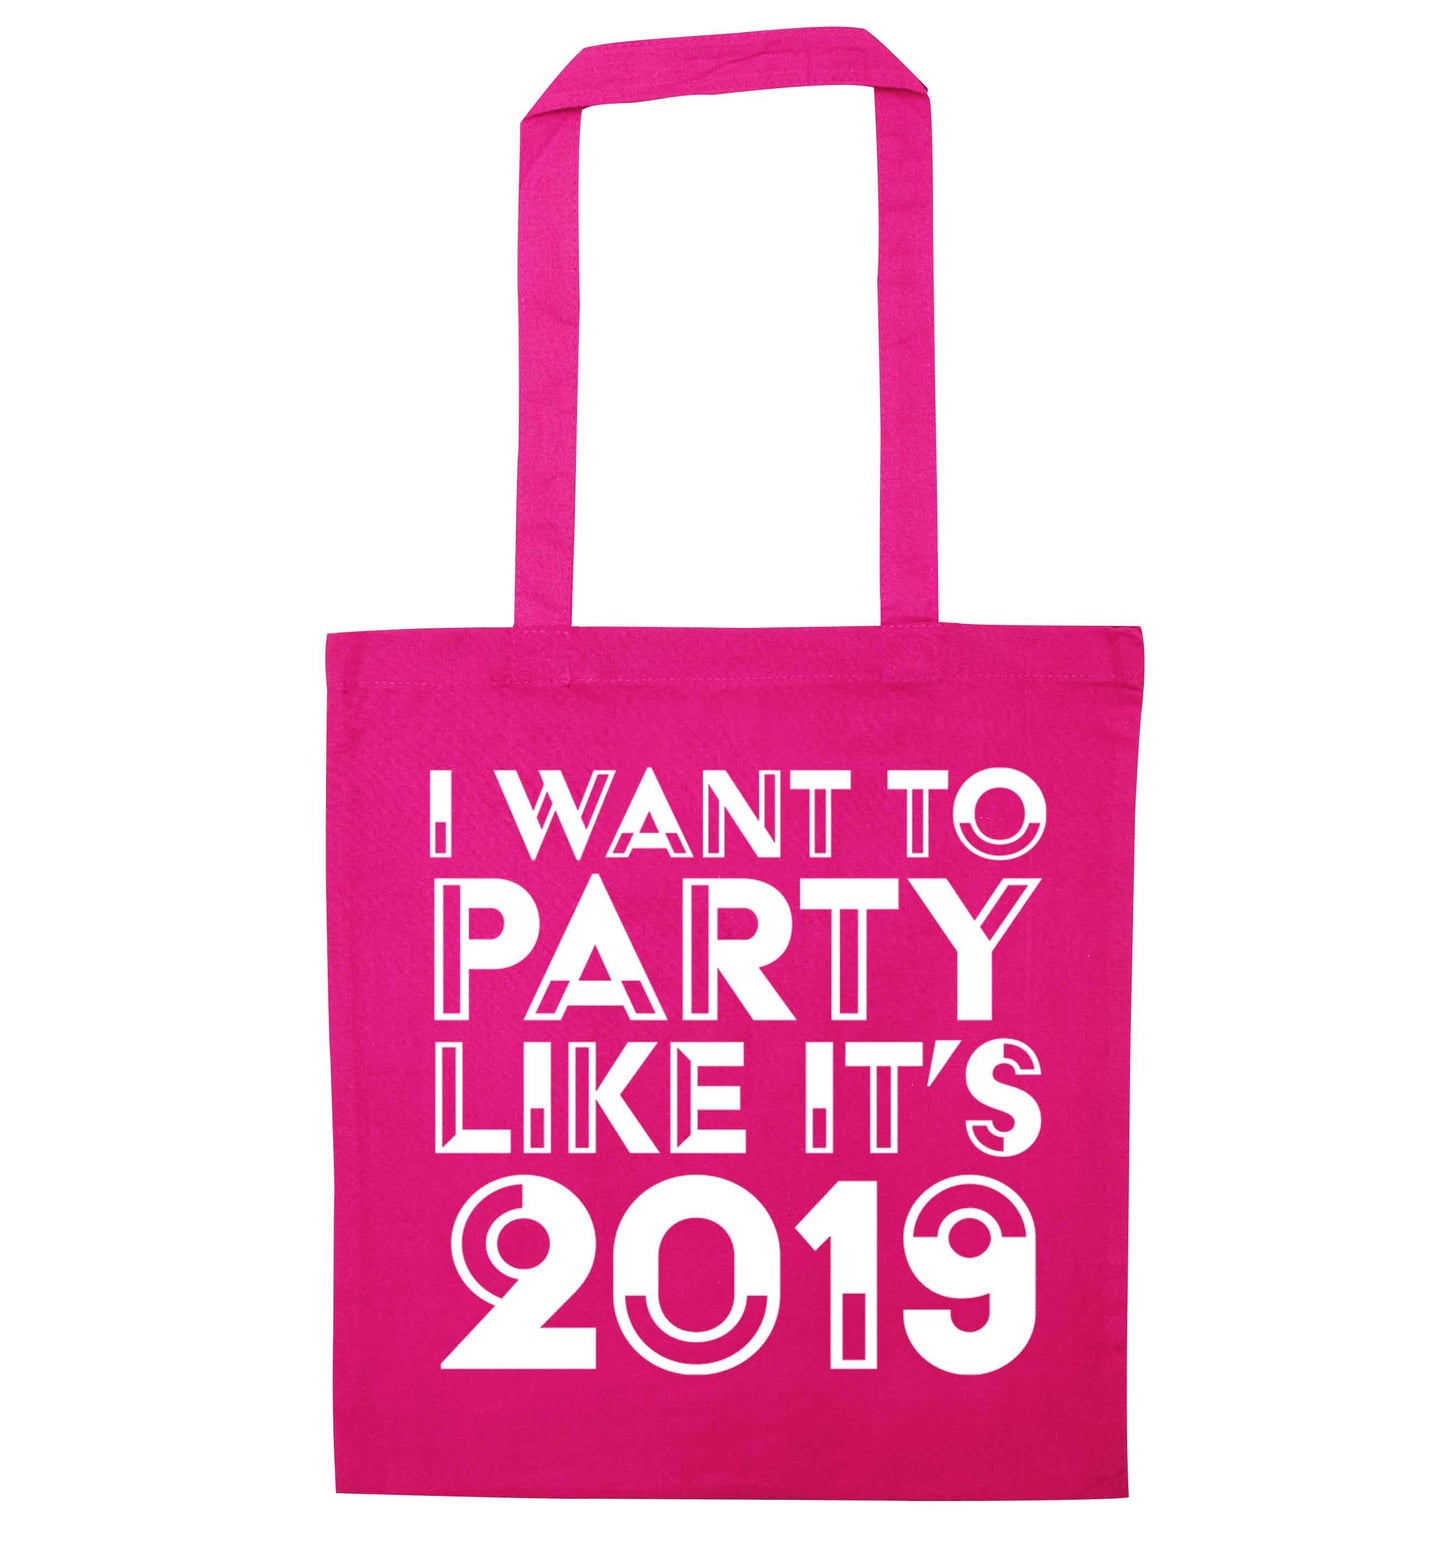 I want to party like it's 2019 pink tote bag